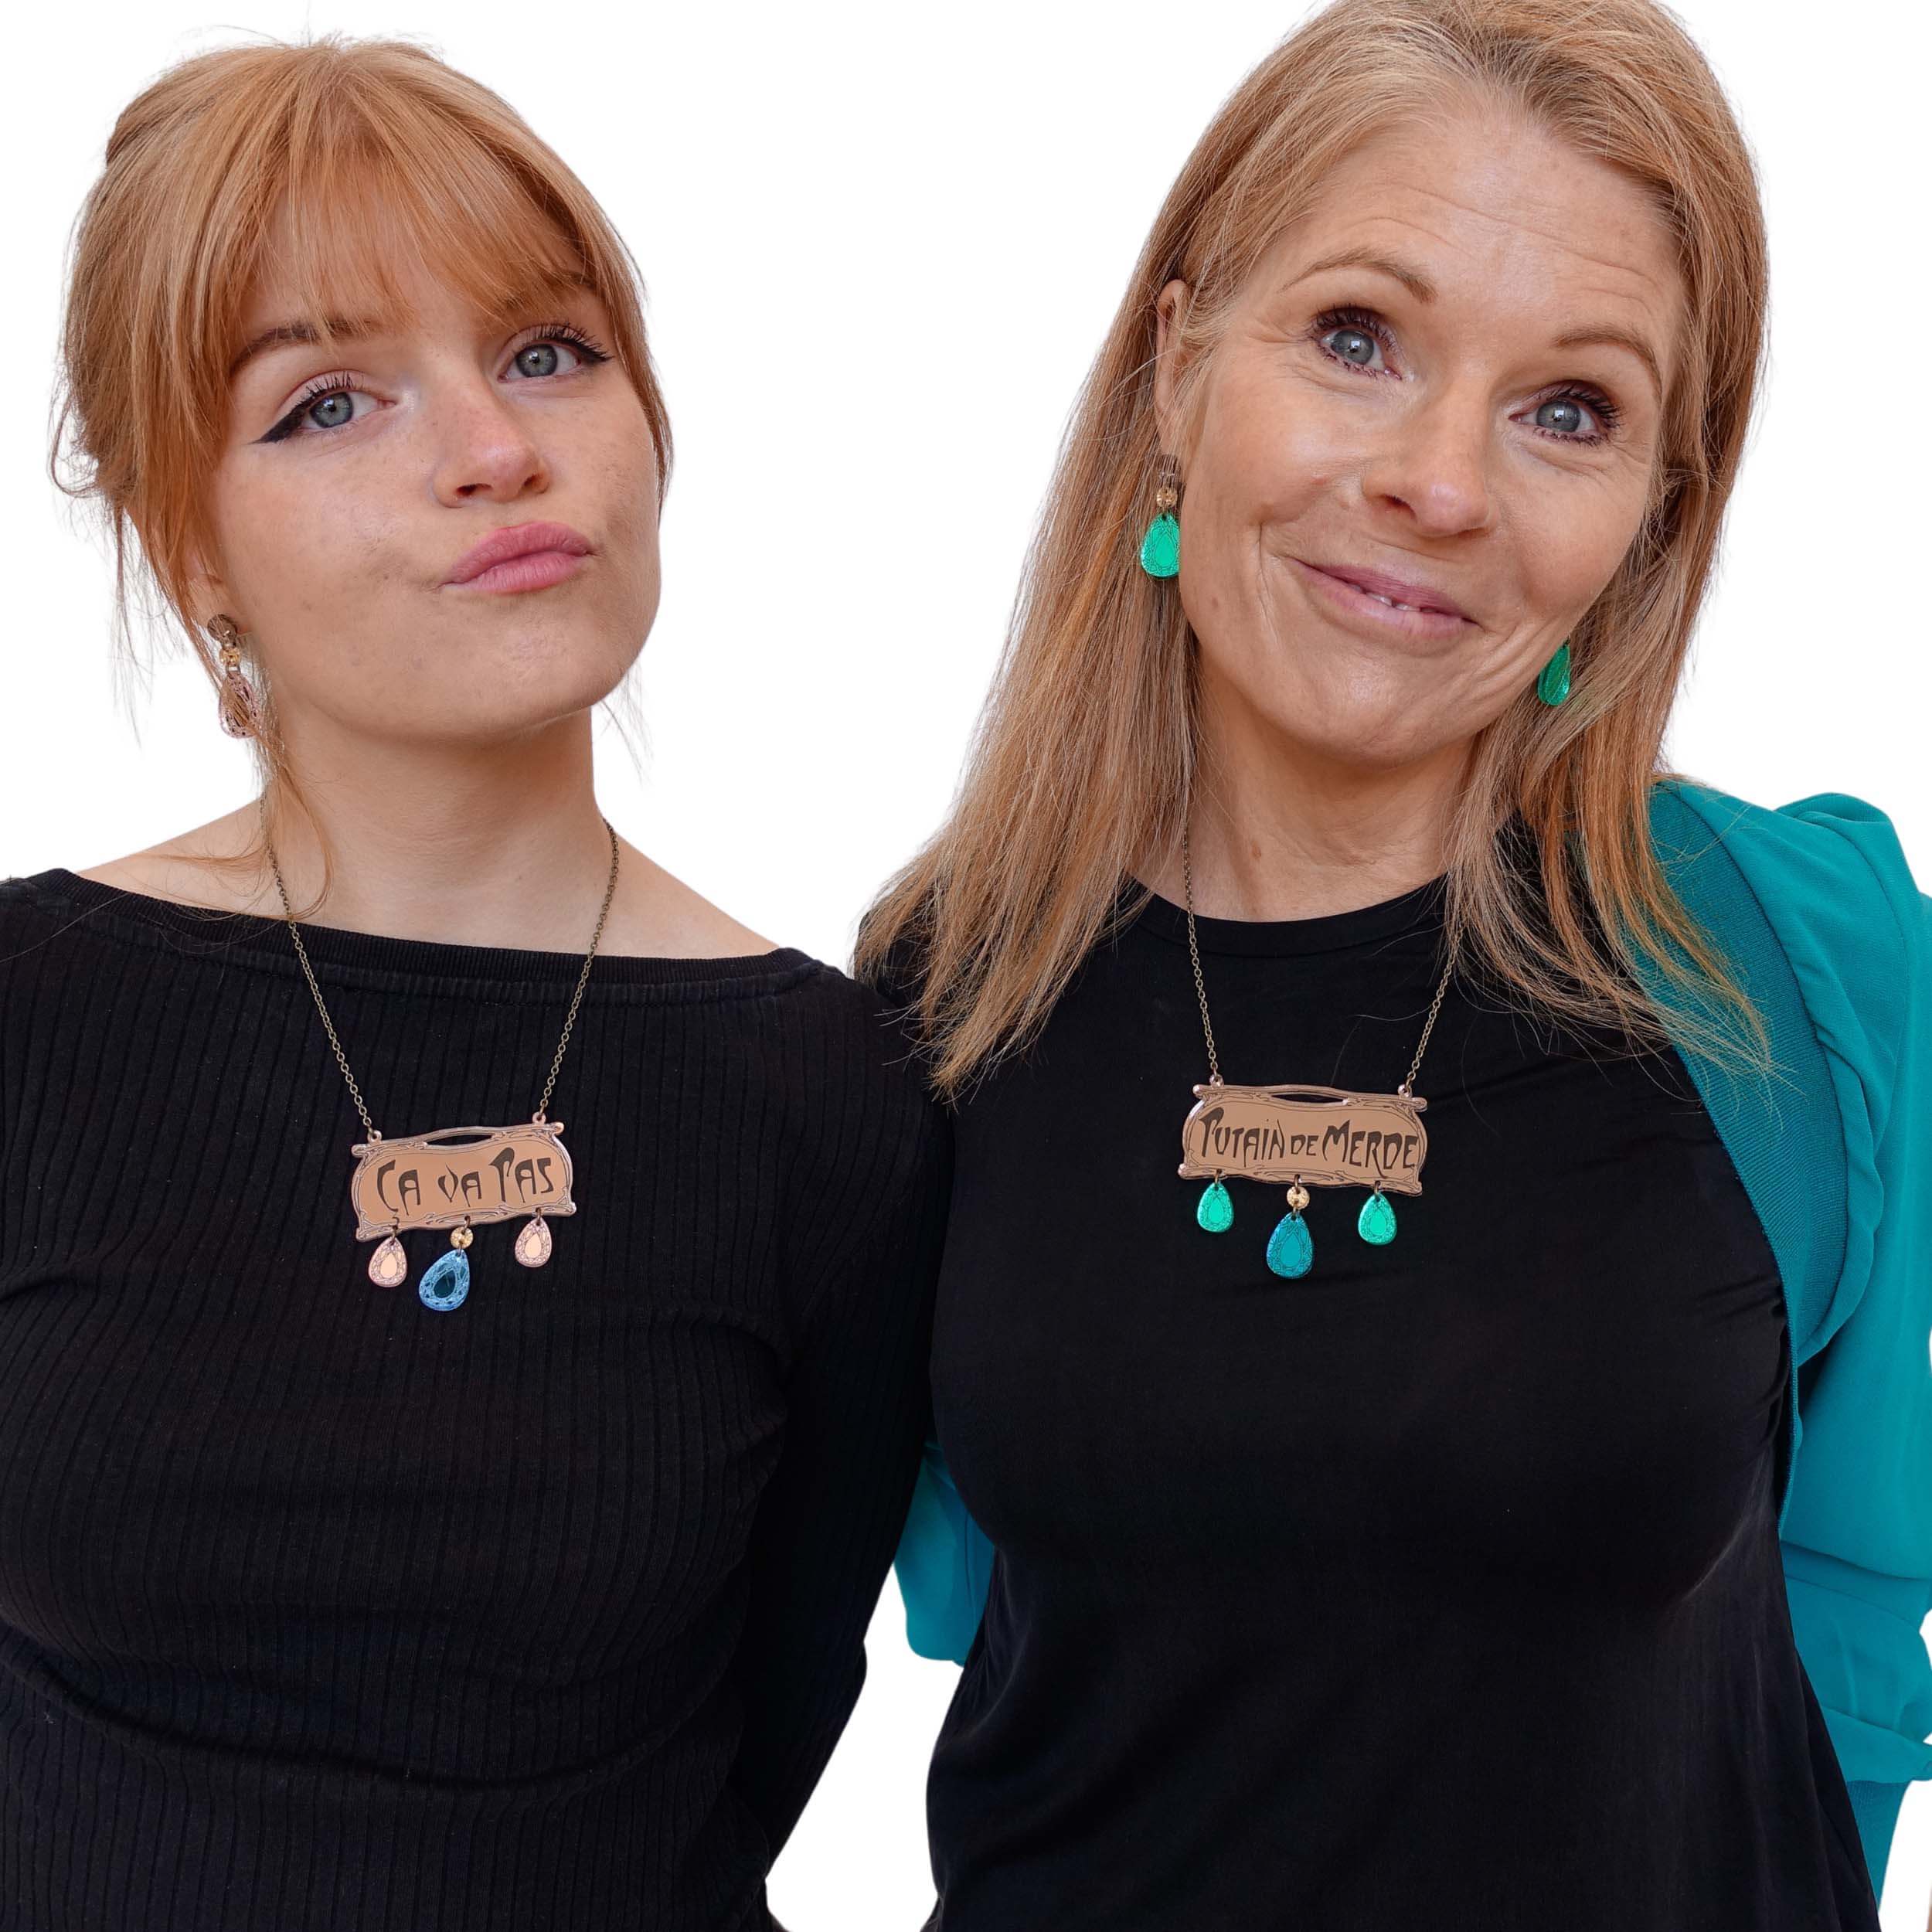 Eliza wearing French CA VA PAS necklace and matching rose gold French drop earrings, while Sarah wears the swearier P*TAINE DE M*RDE necklace, and matching electric green French drop earrings from the Austerity Jewels Belle Epoque Paris-inspired collection.  